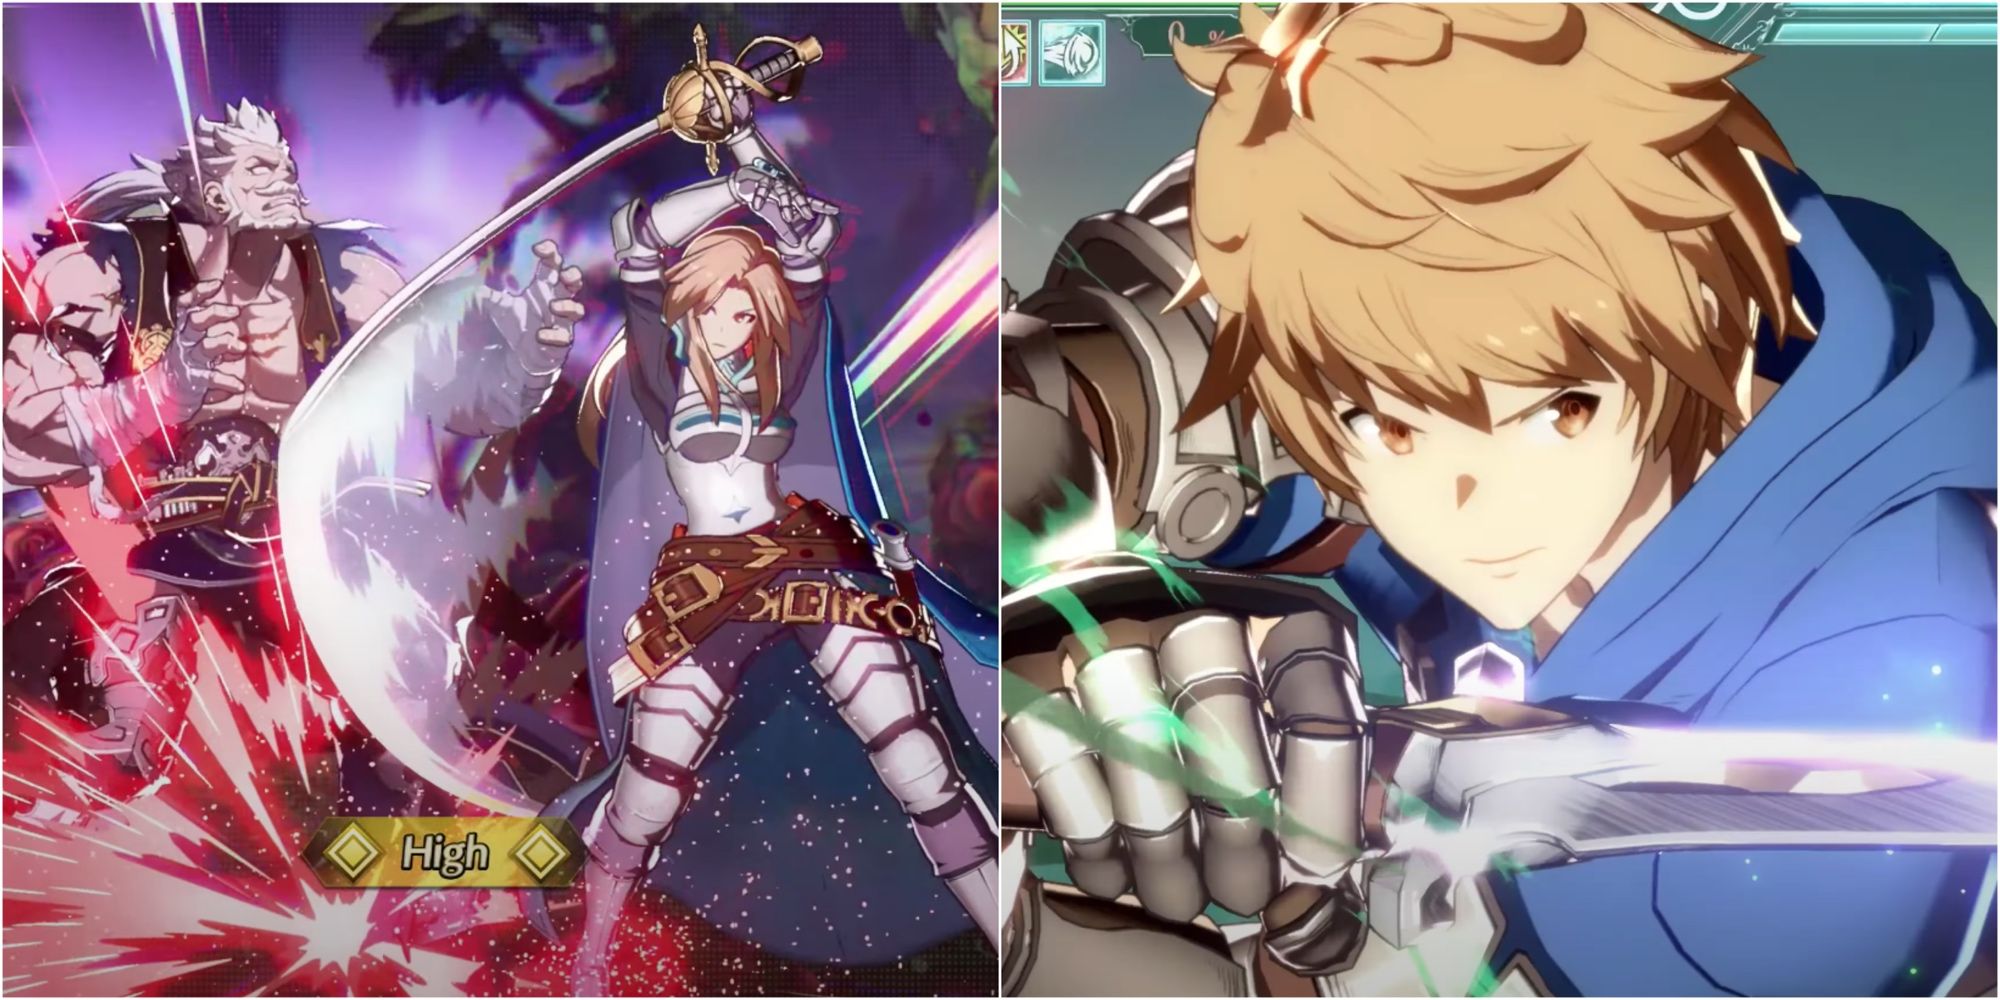 Fighters attacking each other with swords in Granblue Fantasy Versus: Rising 